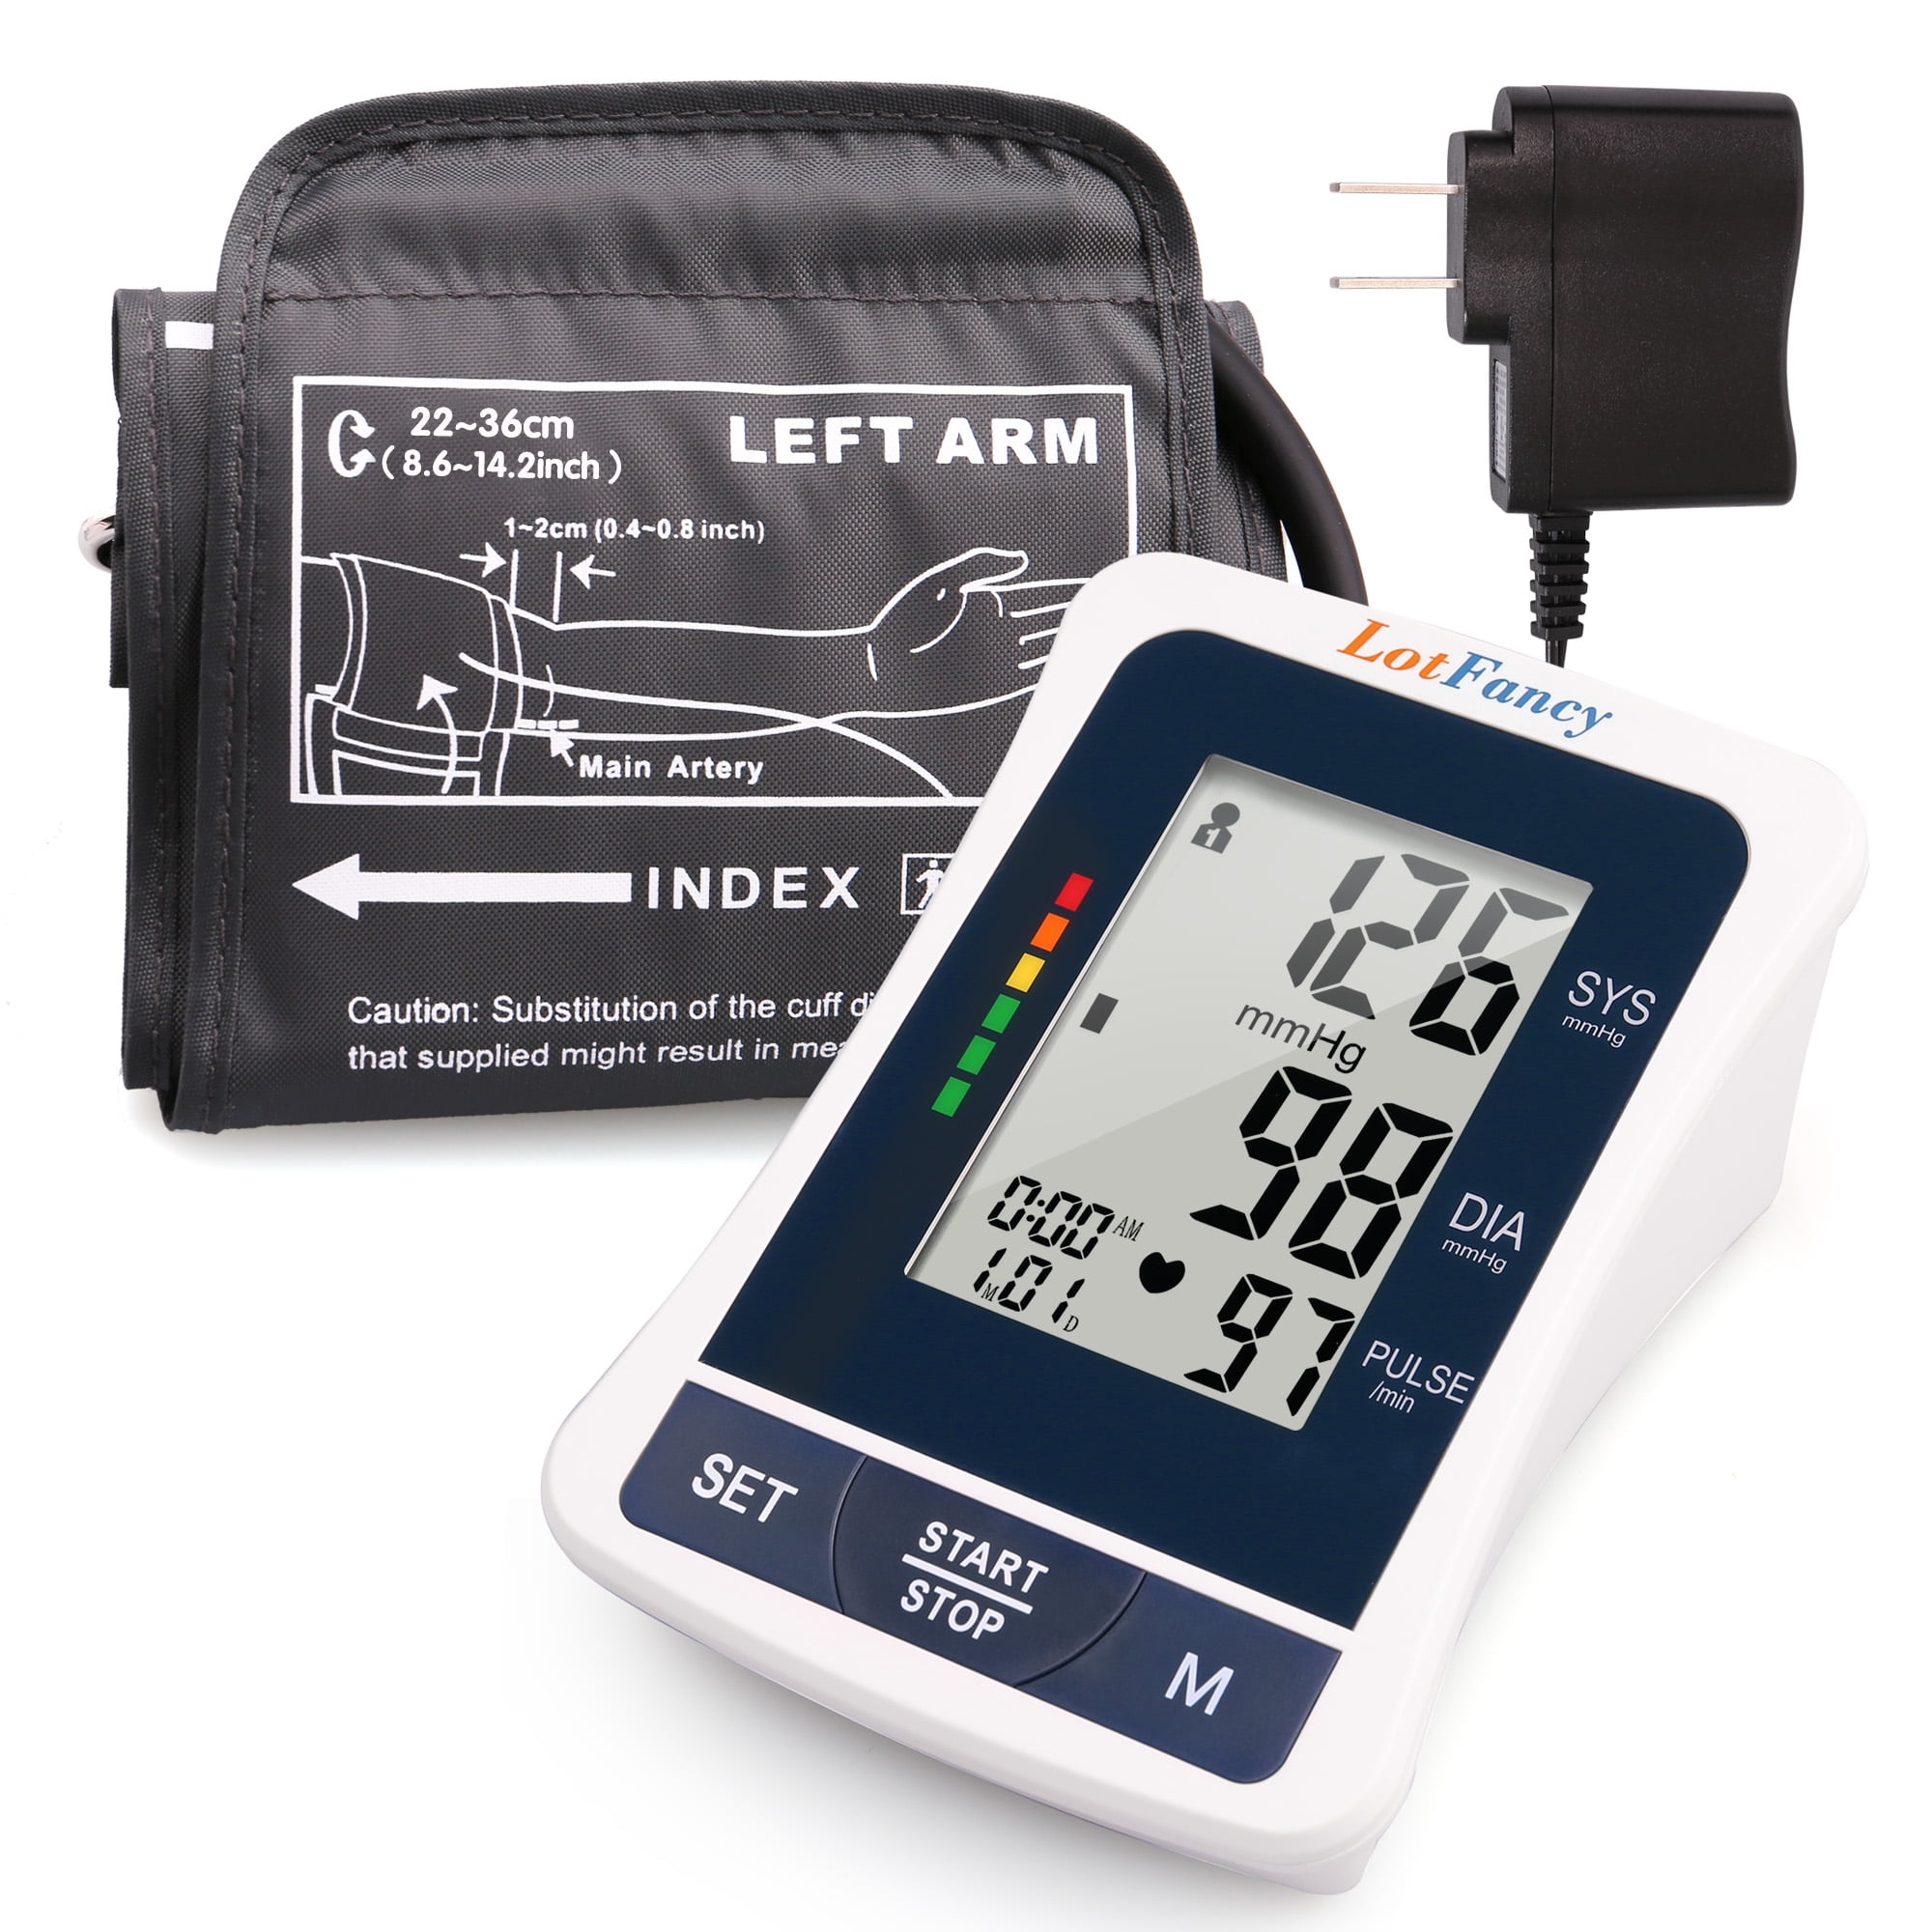  Blood Pressure Machine Upper Arm Large Cuff, Automatic Blood  Pressure Monitors & Pulse Rate Monitor Meter with LCD Display 198 Sets  Memory Adjustable BP Cuff 8.7-16.5in, USB or Battery Power by